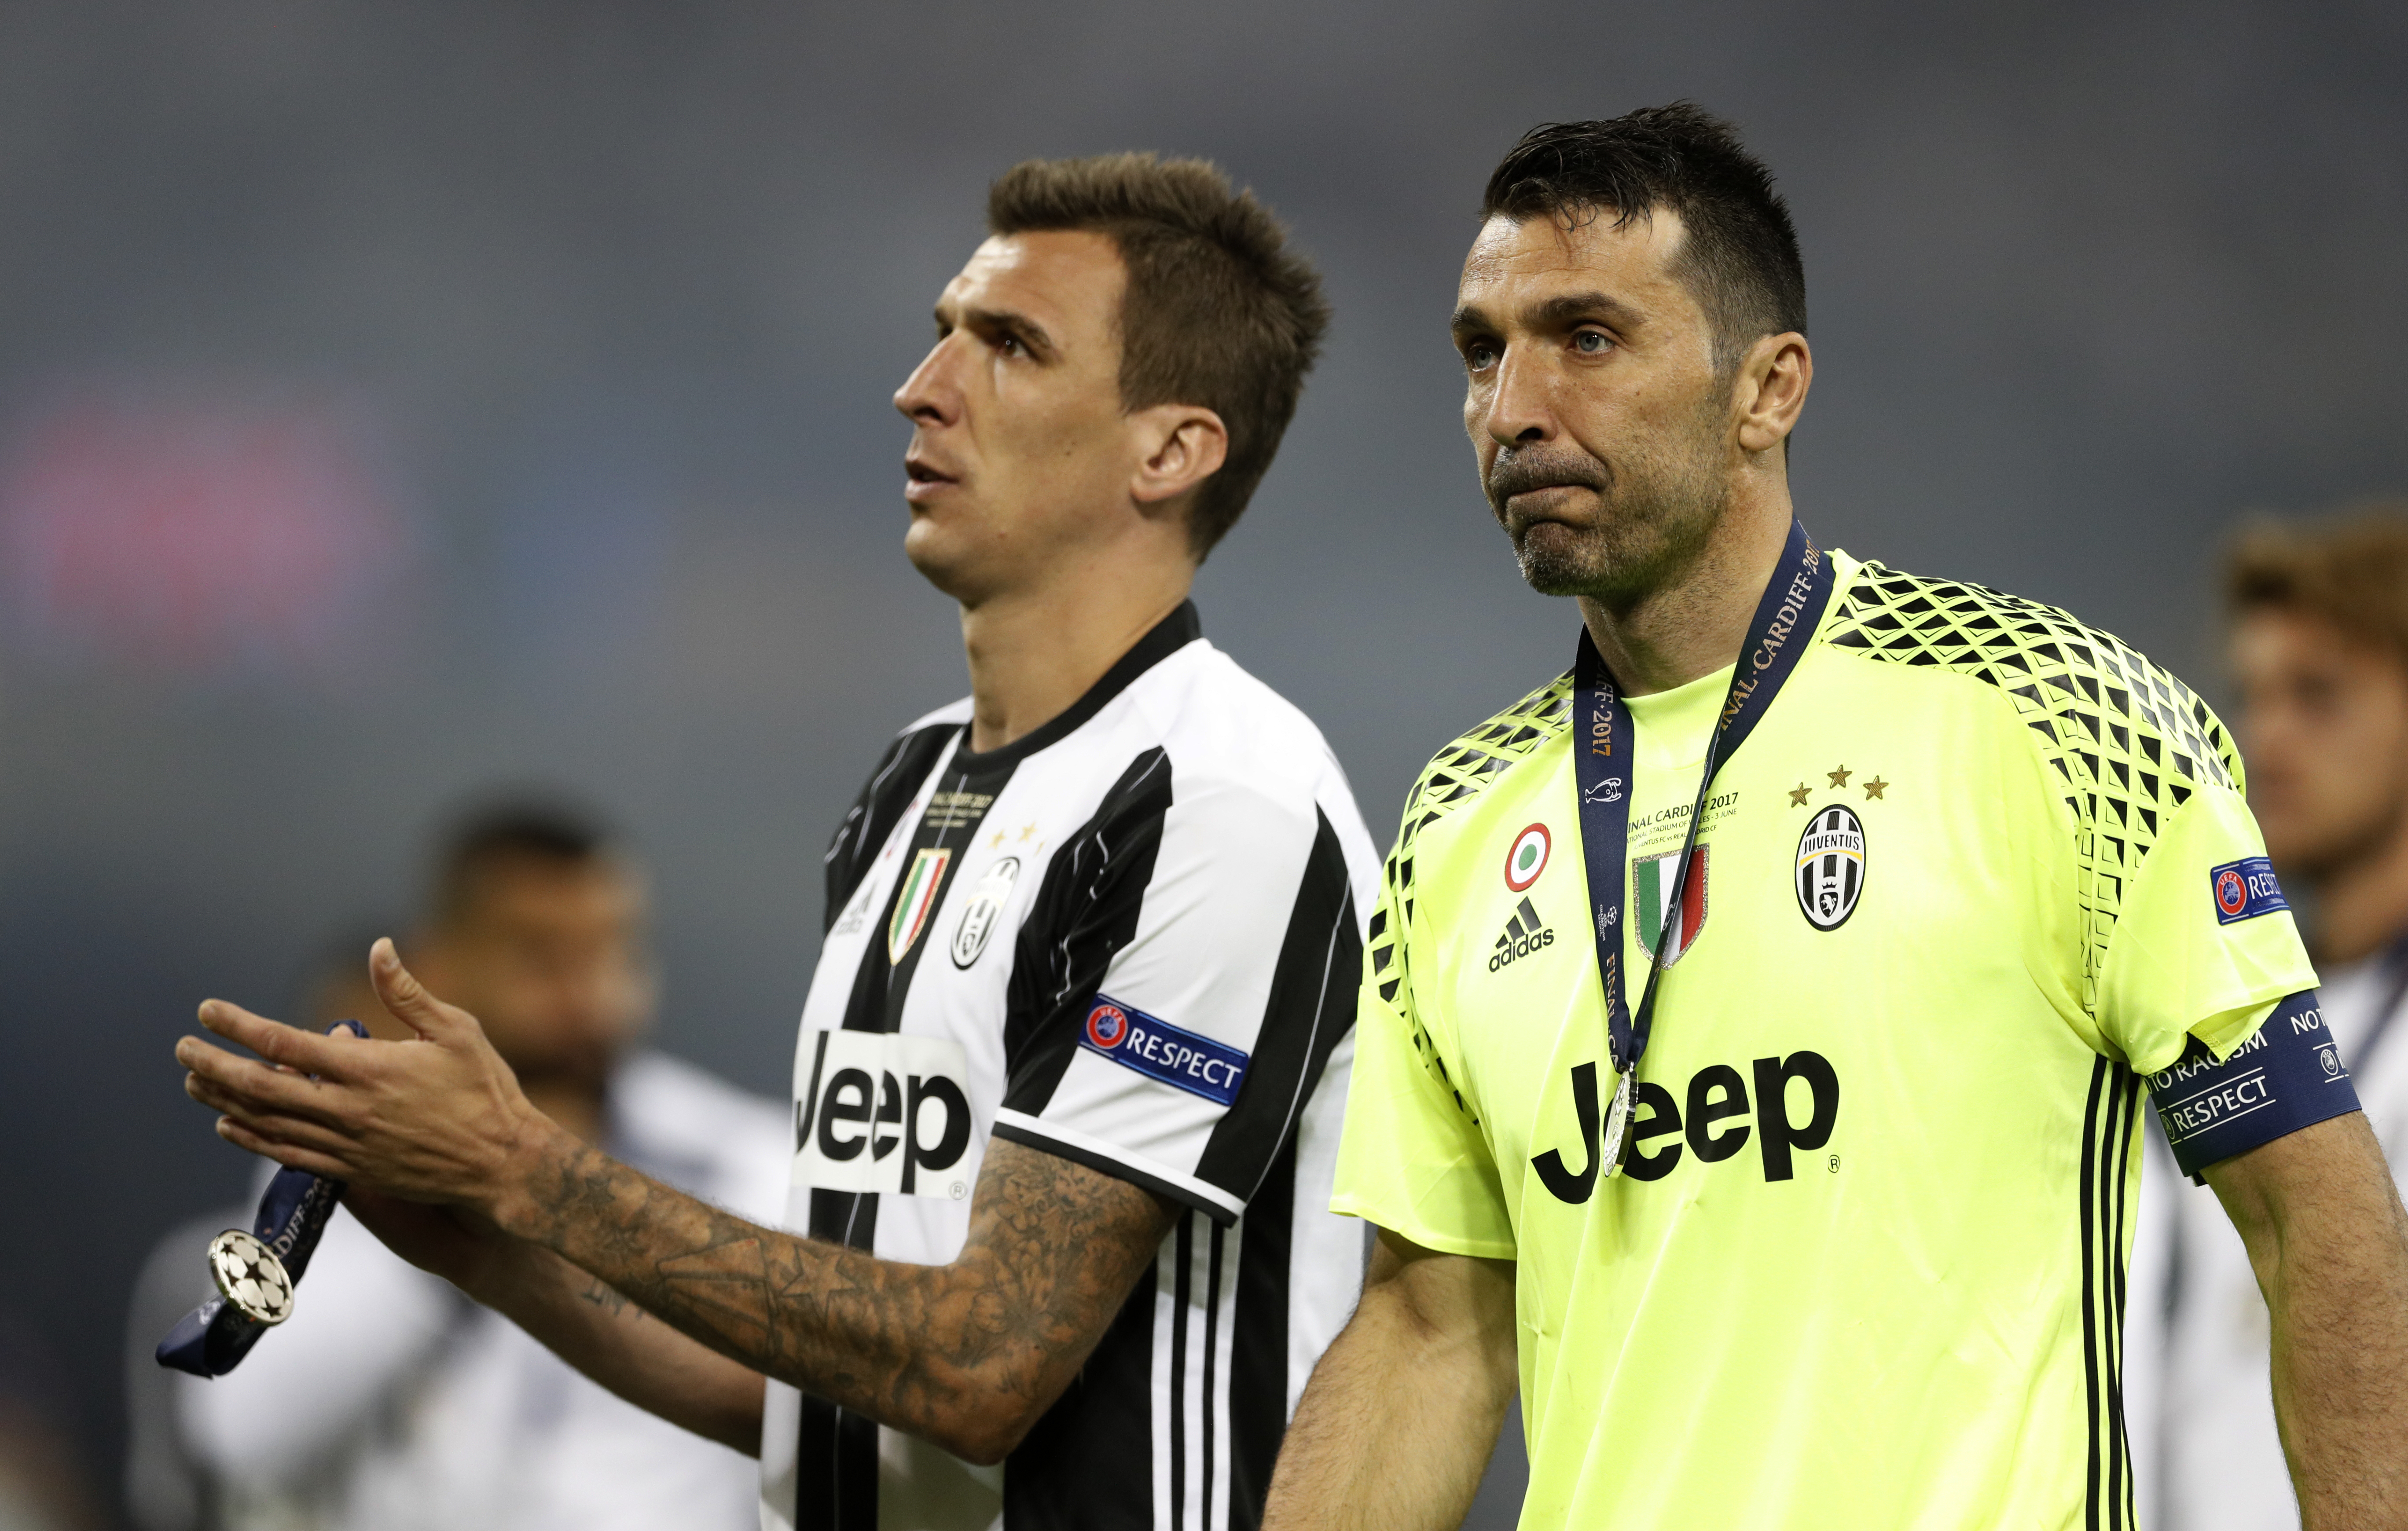 Britain Soccer Football - Juventus v Real Madrid - UEFA Champions League Final - The National Stadium of Wales, Cardiff - June 3, 2017 Juventus' Mario Mandzukic and Gianluigi Buffon look dejected after the match Reuters / John Sibley Livepic